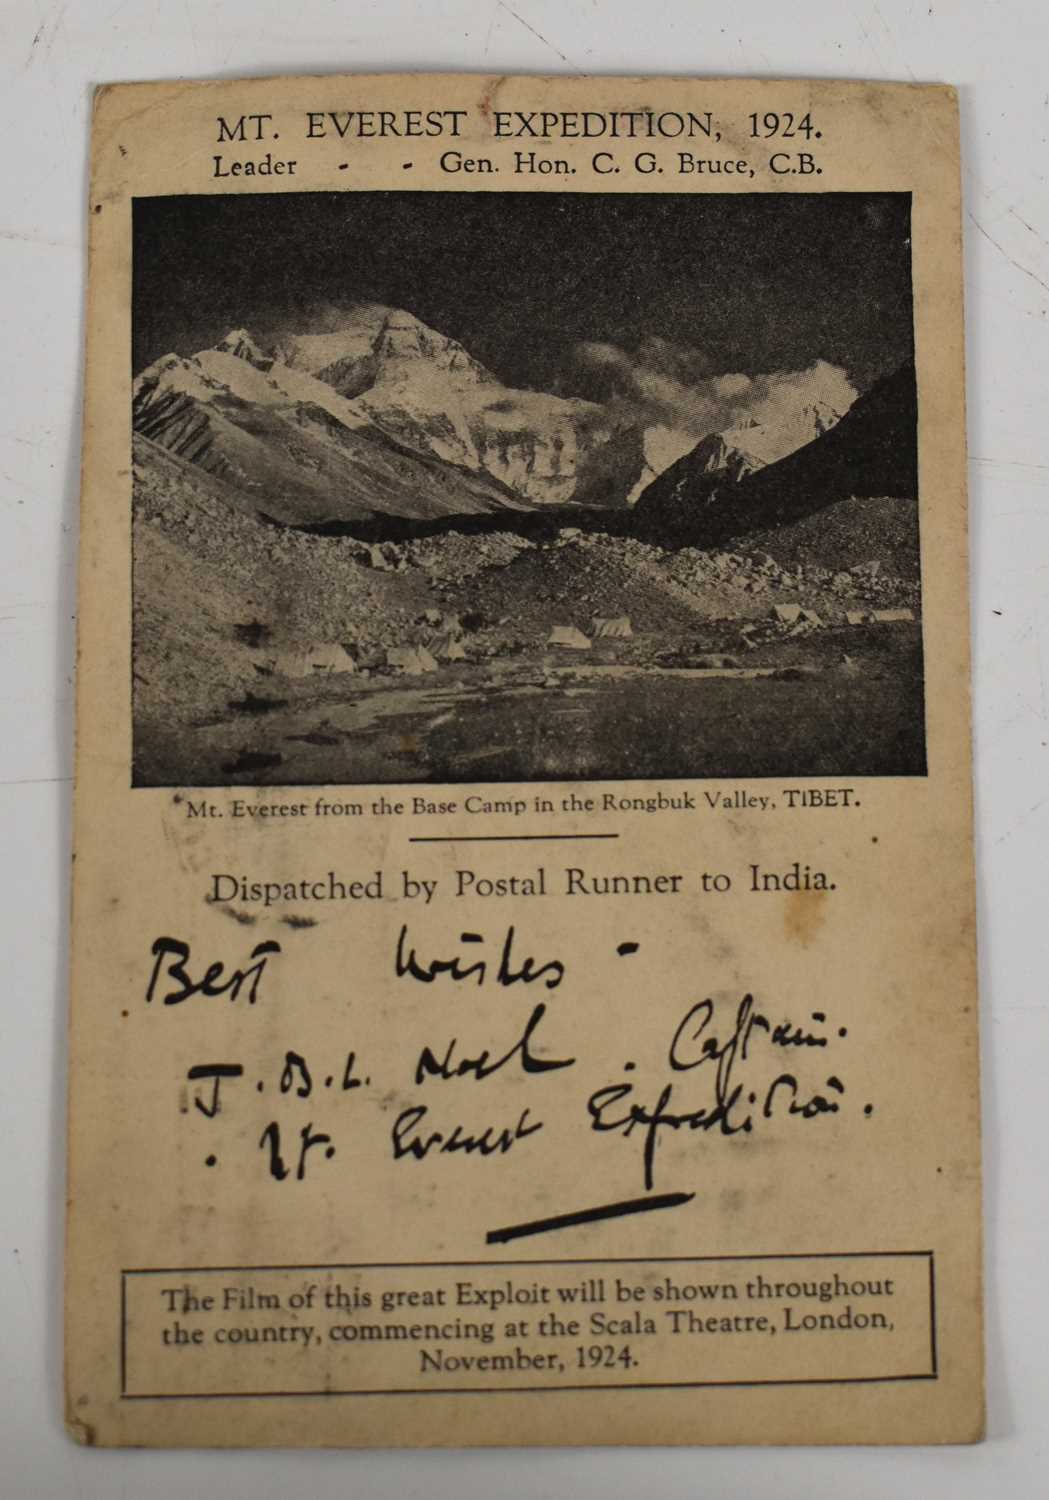 A Mount Everest Expedition 1924 commemorative postcard, dispatched from Everest base camp with